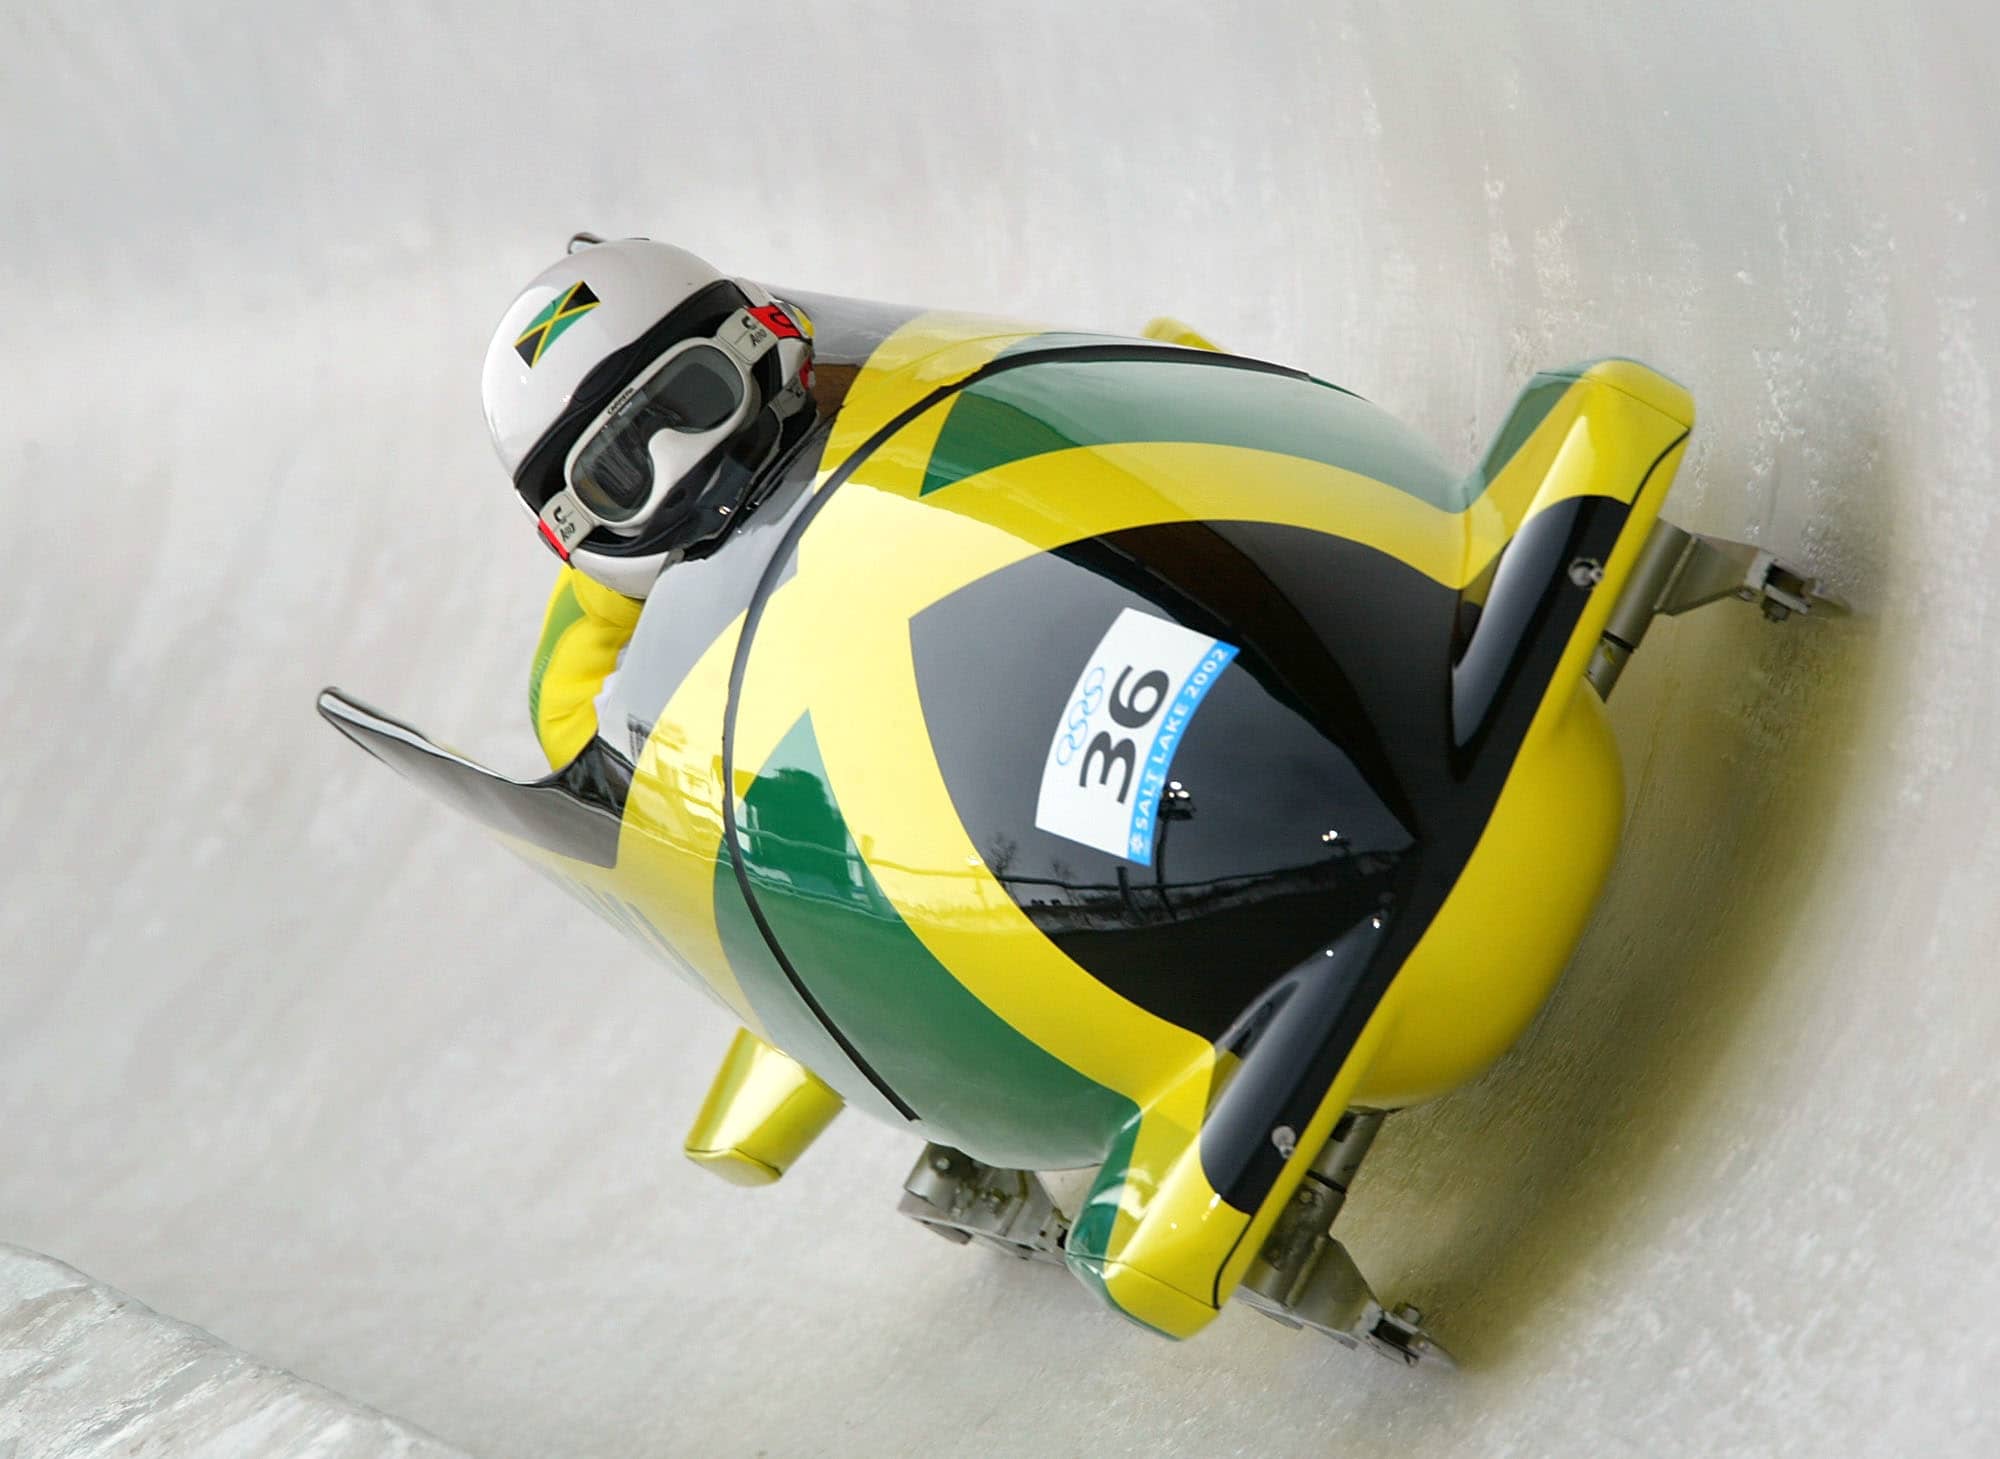 Jamaican bobsled team uses crowdfunding